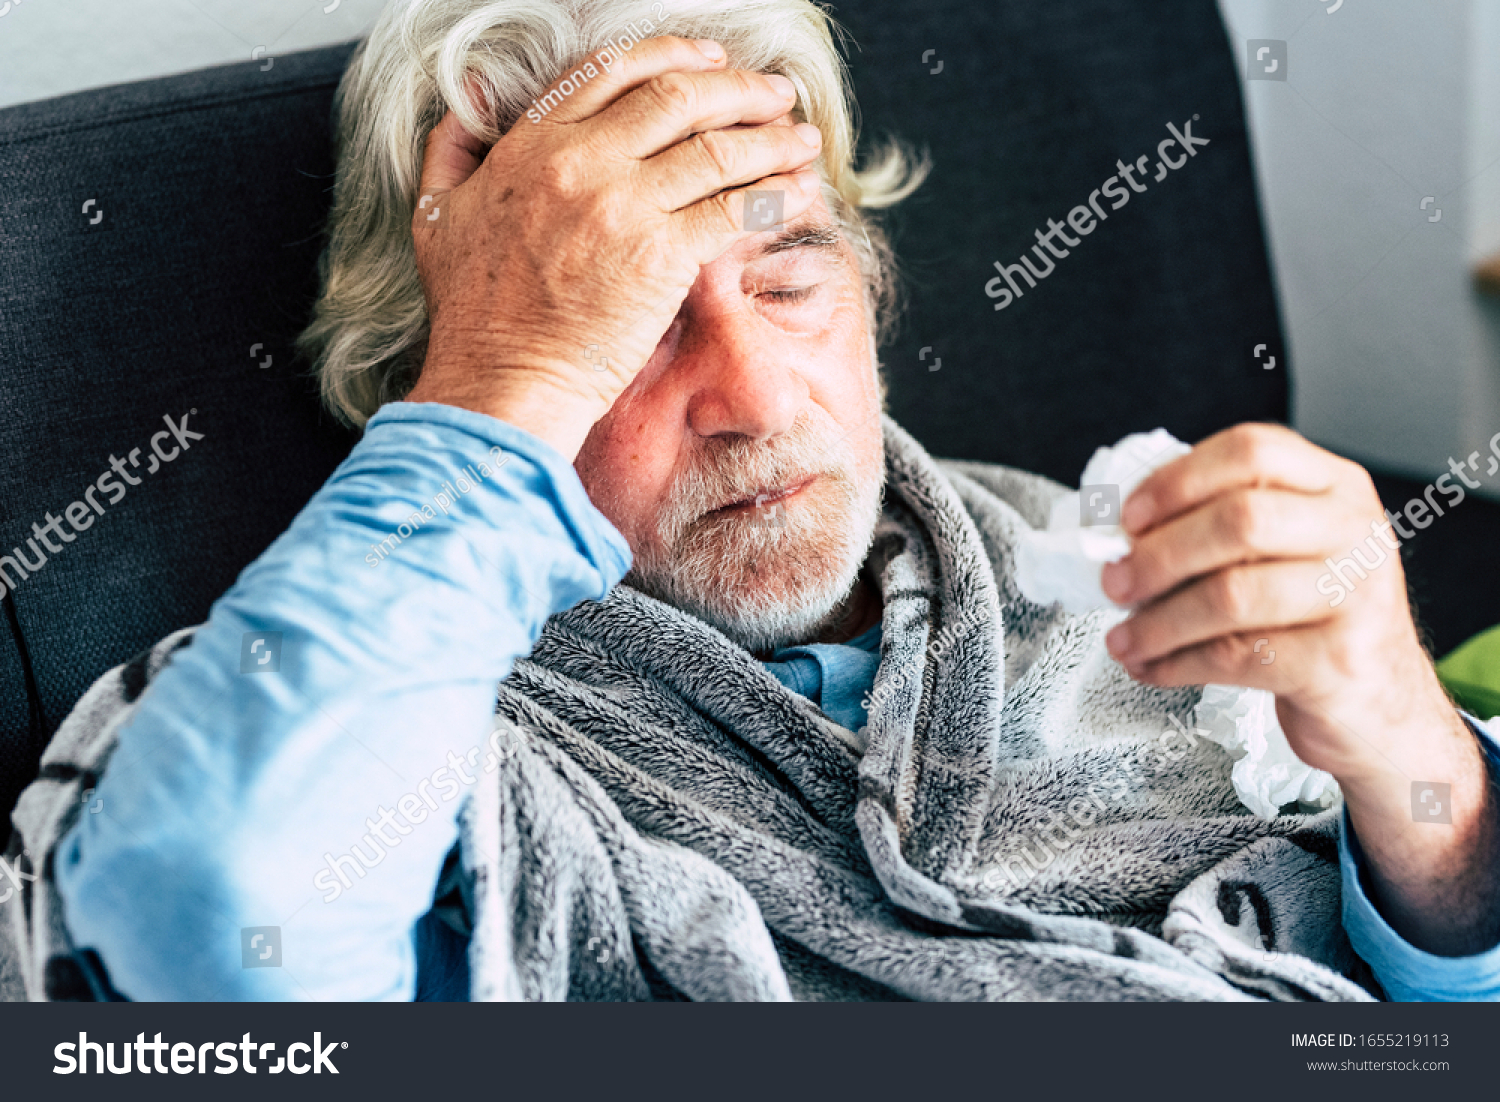 New coronavirus CoVid-19 outbreak situation with pandemic epidemic warning - adult caucasian senior old man with fever symptoms like illness cold seasonal influenza - people and virus concept #1655219113